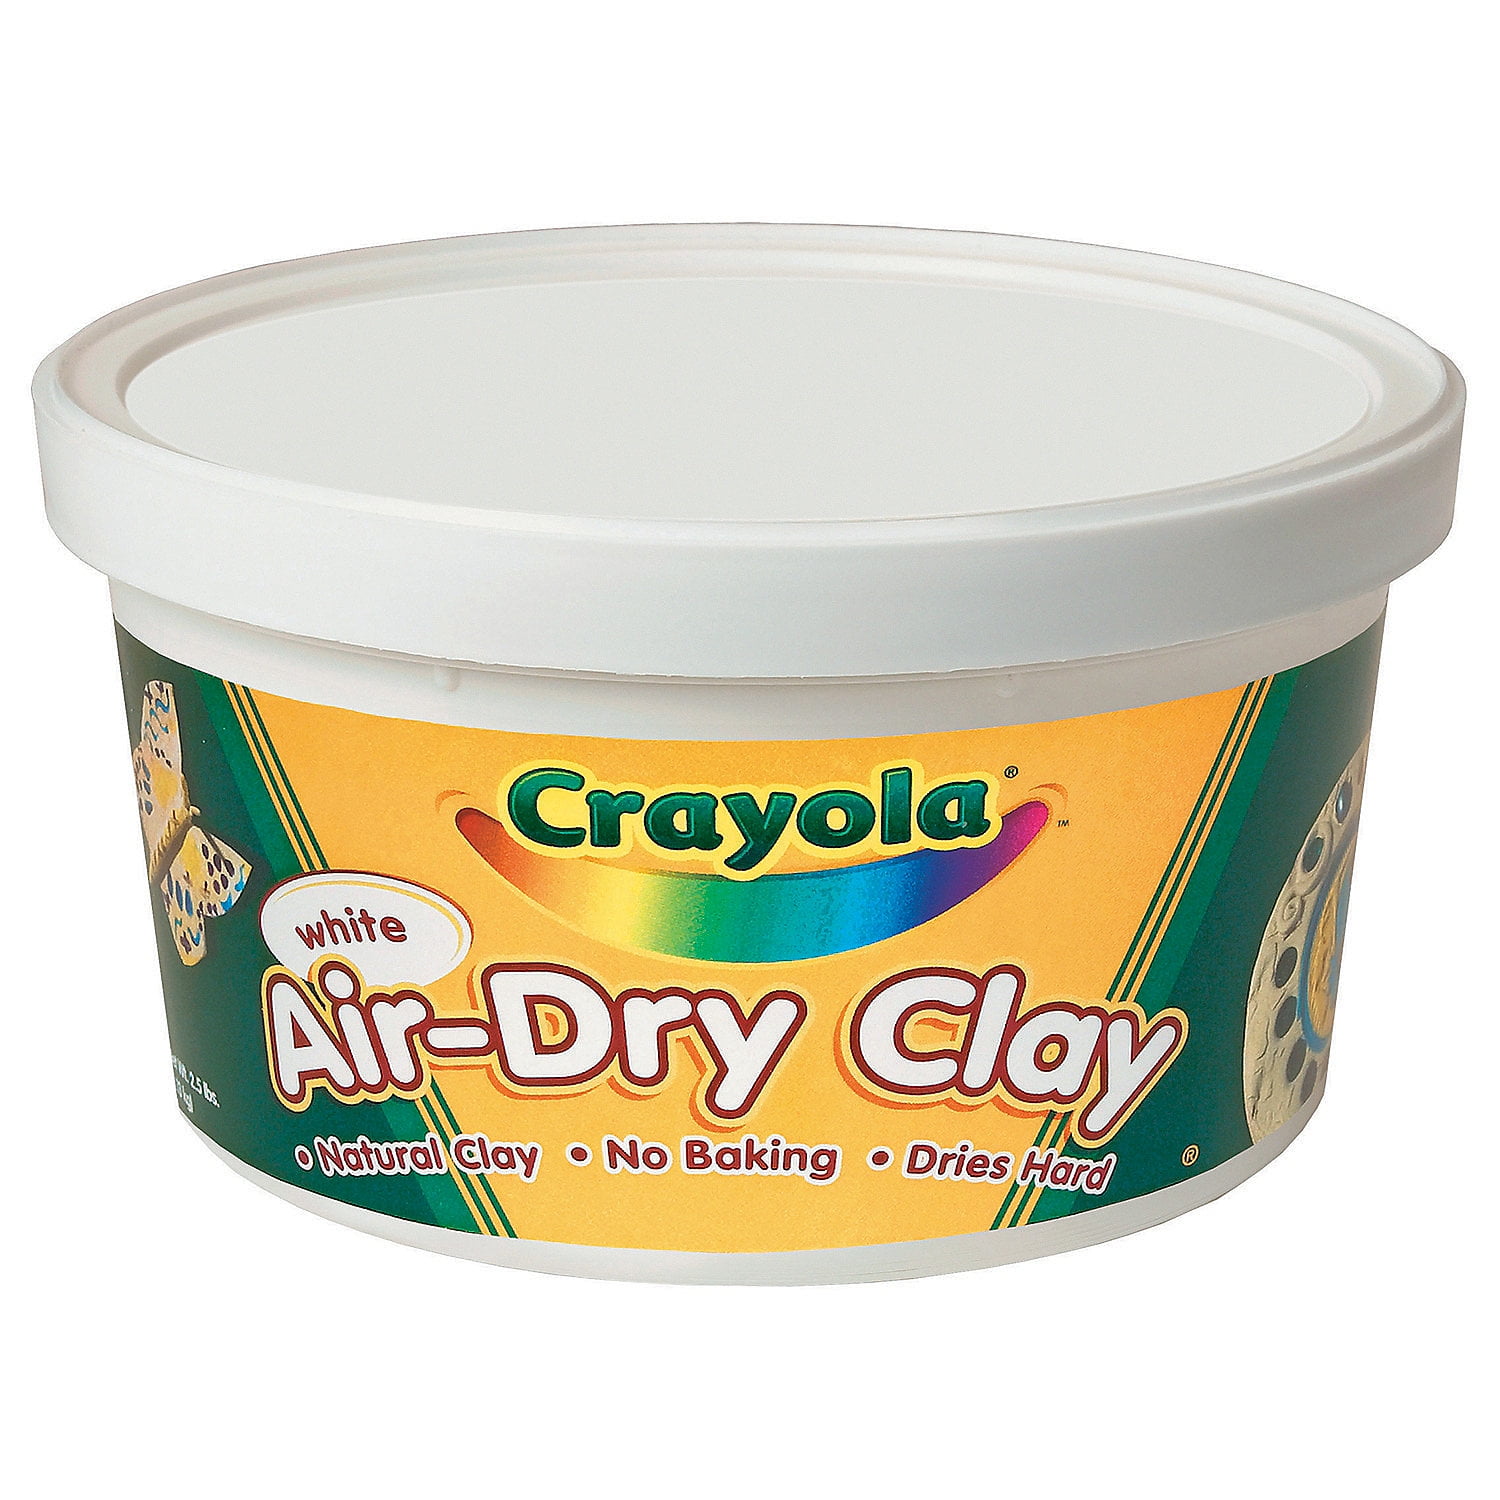 Crayola Air-Dry Clay - Assorted, Pkg of 4, 2.5 lb